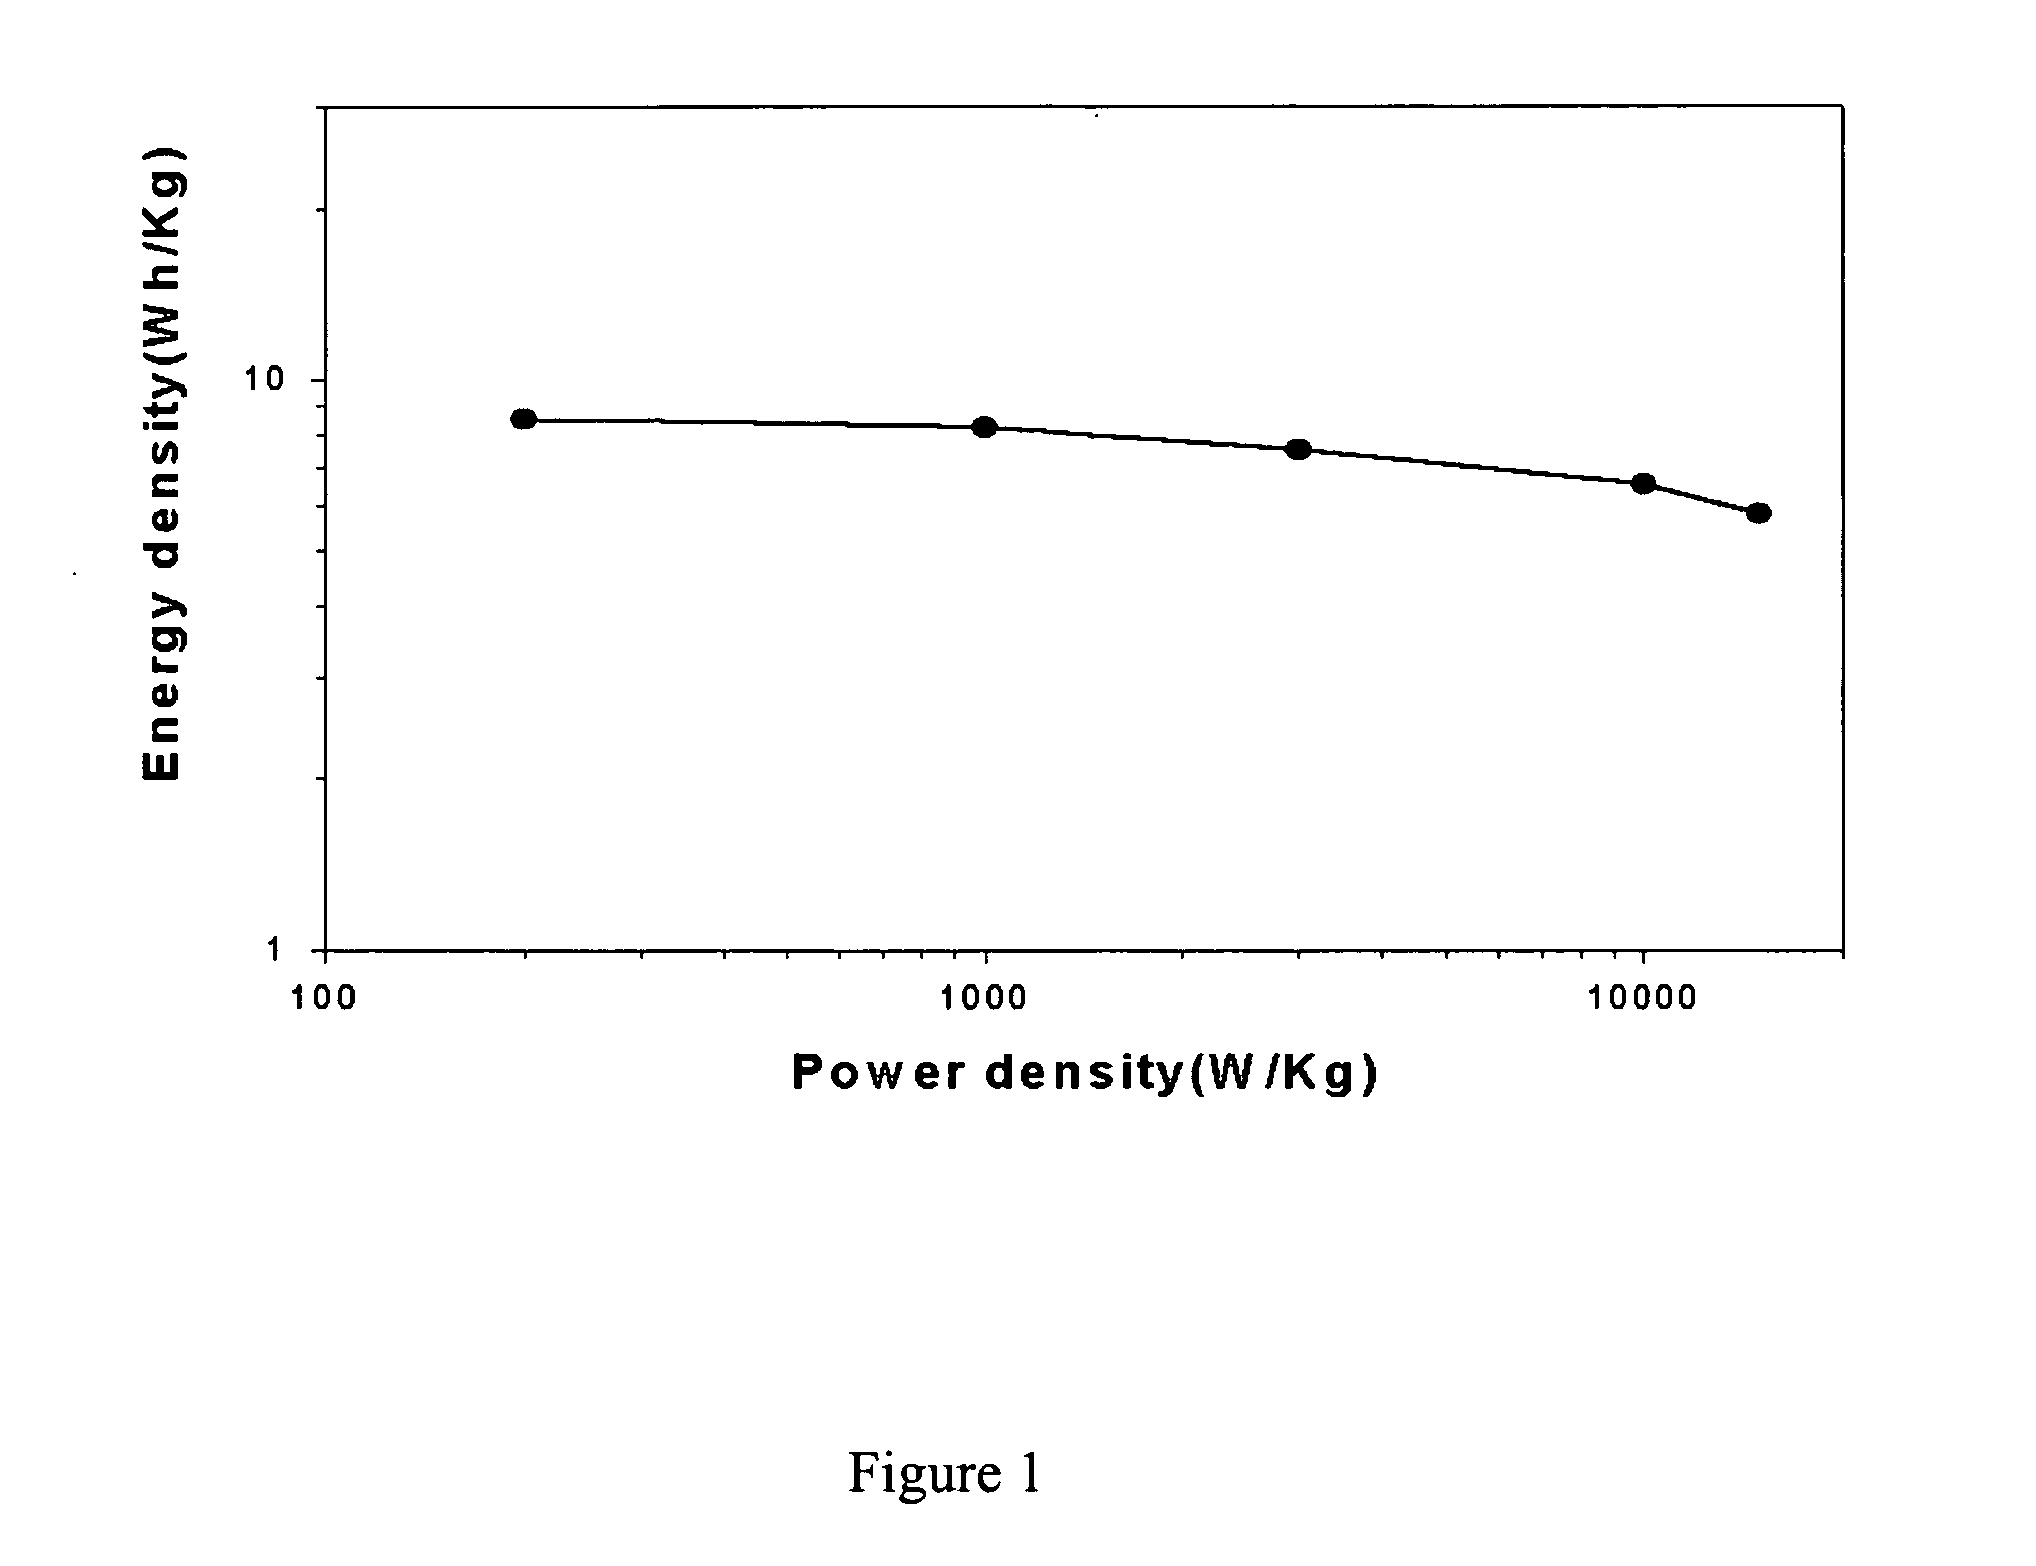 Carbon nanotube or carbon nanofiber electrode comprising sulfur or metal nanoparticles as a binder and process for preparing the same